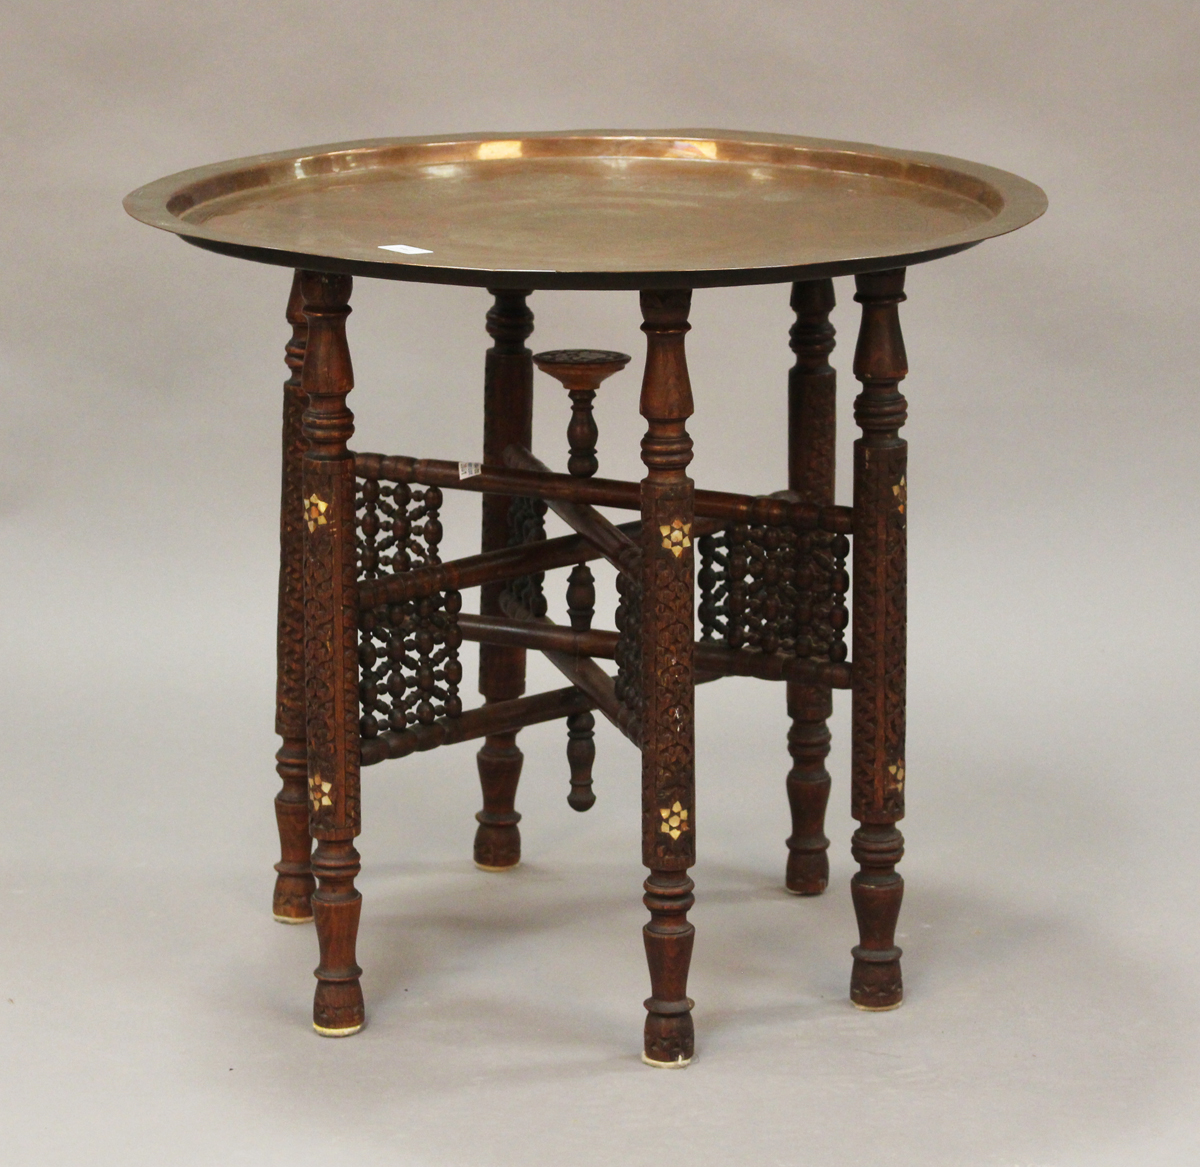 A late 19th/early 20th century Middle Eastern Islamic tray-top table, the circular copper tray